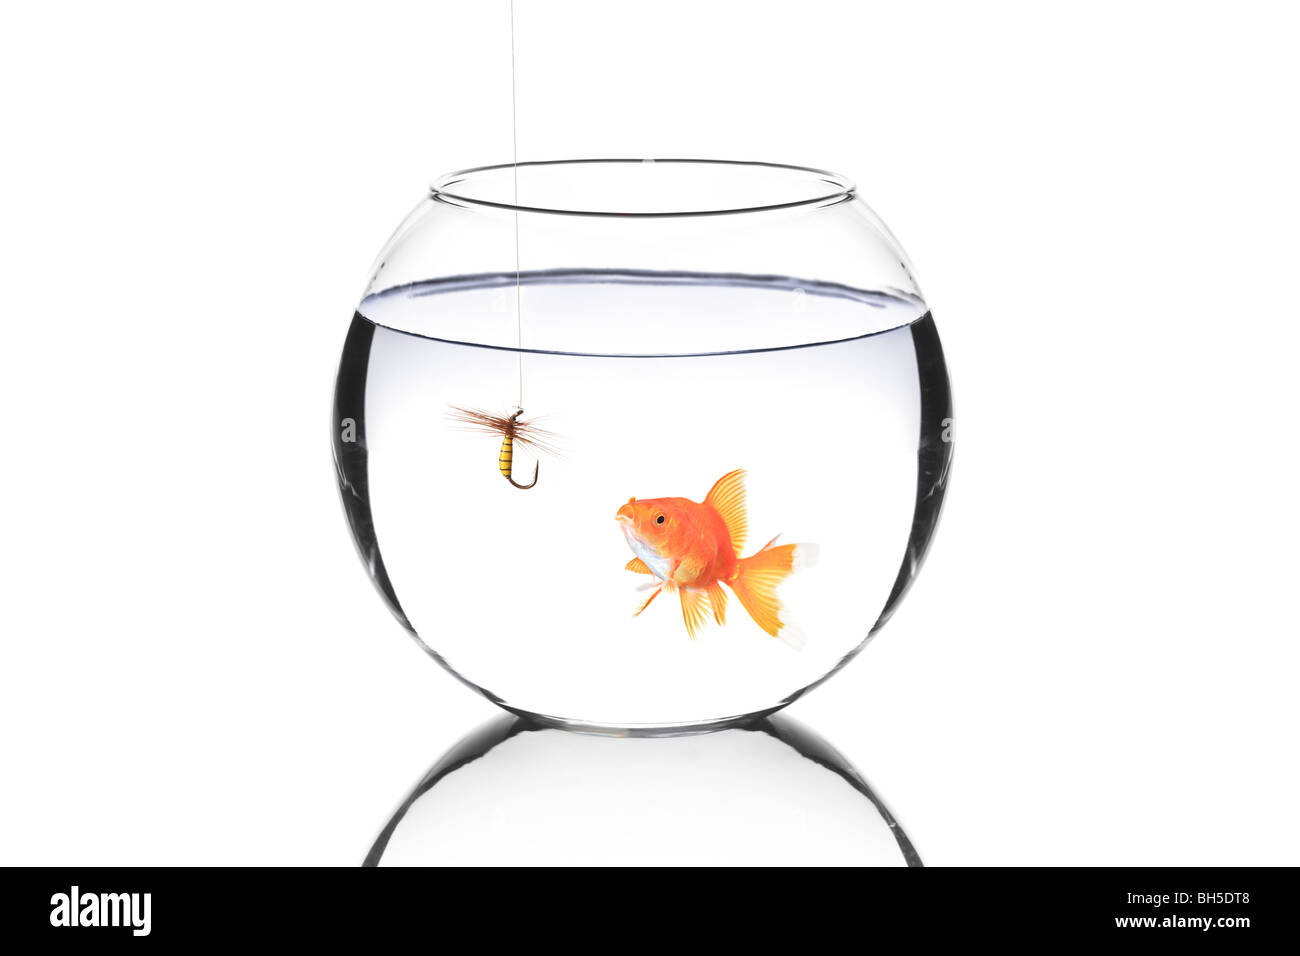 Fish bowl with a fishing hook and a fish isolated against white background Stock Photo